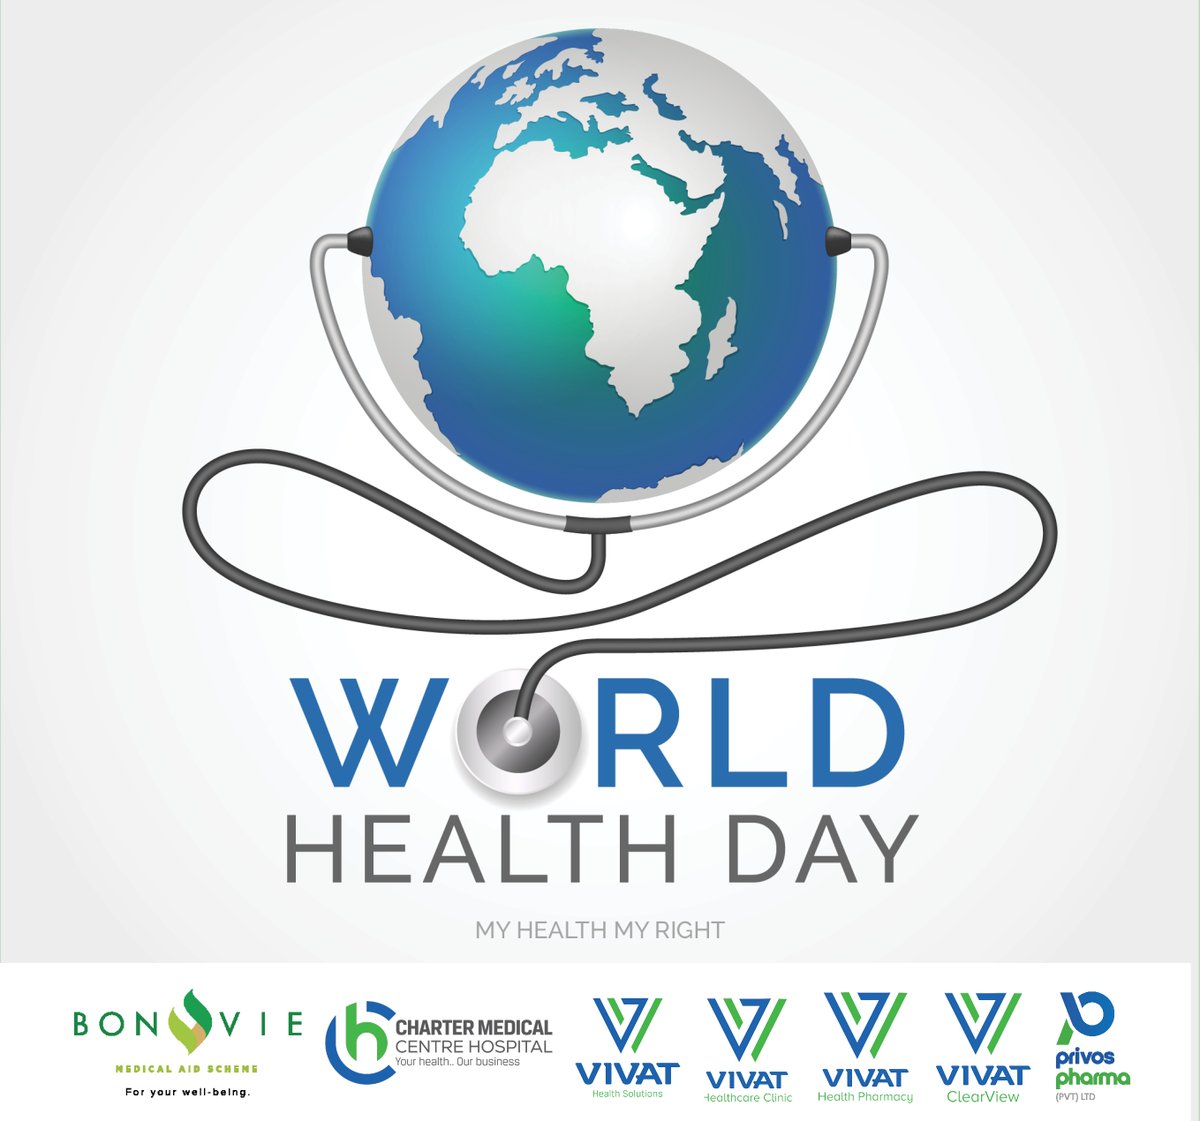 HAPPY WORLD HEALTH DAY! #MyHealthMyRight

#livehealthy #QualityHealthcareRedefined